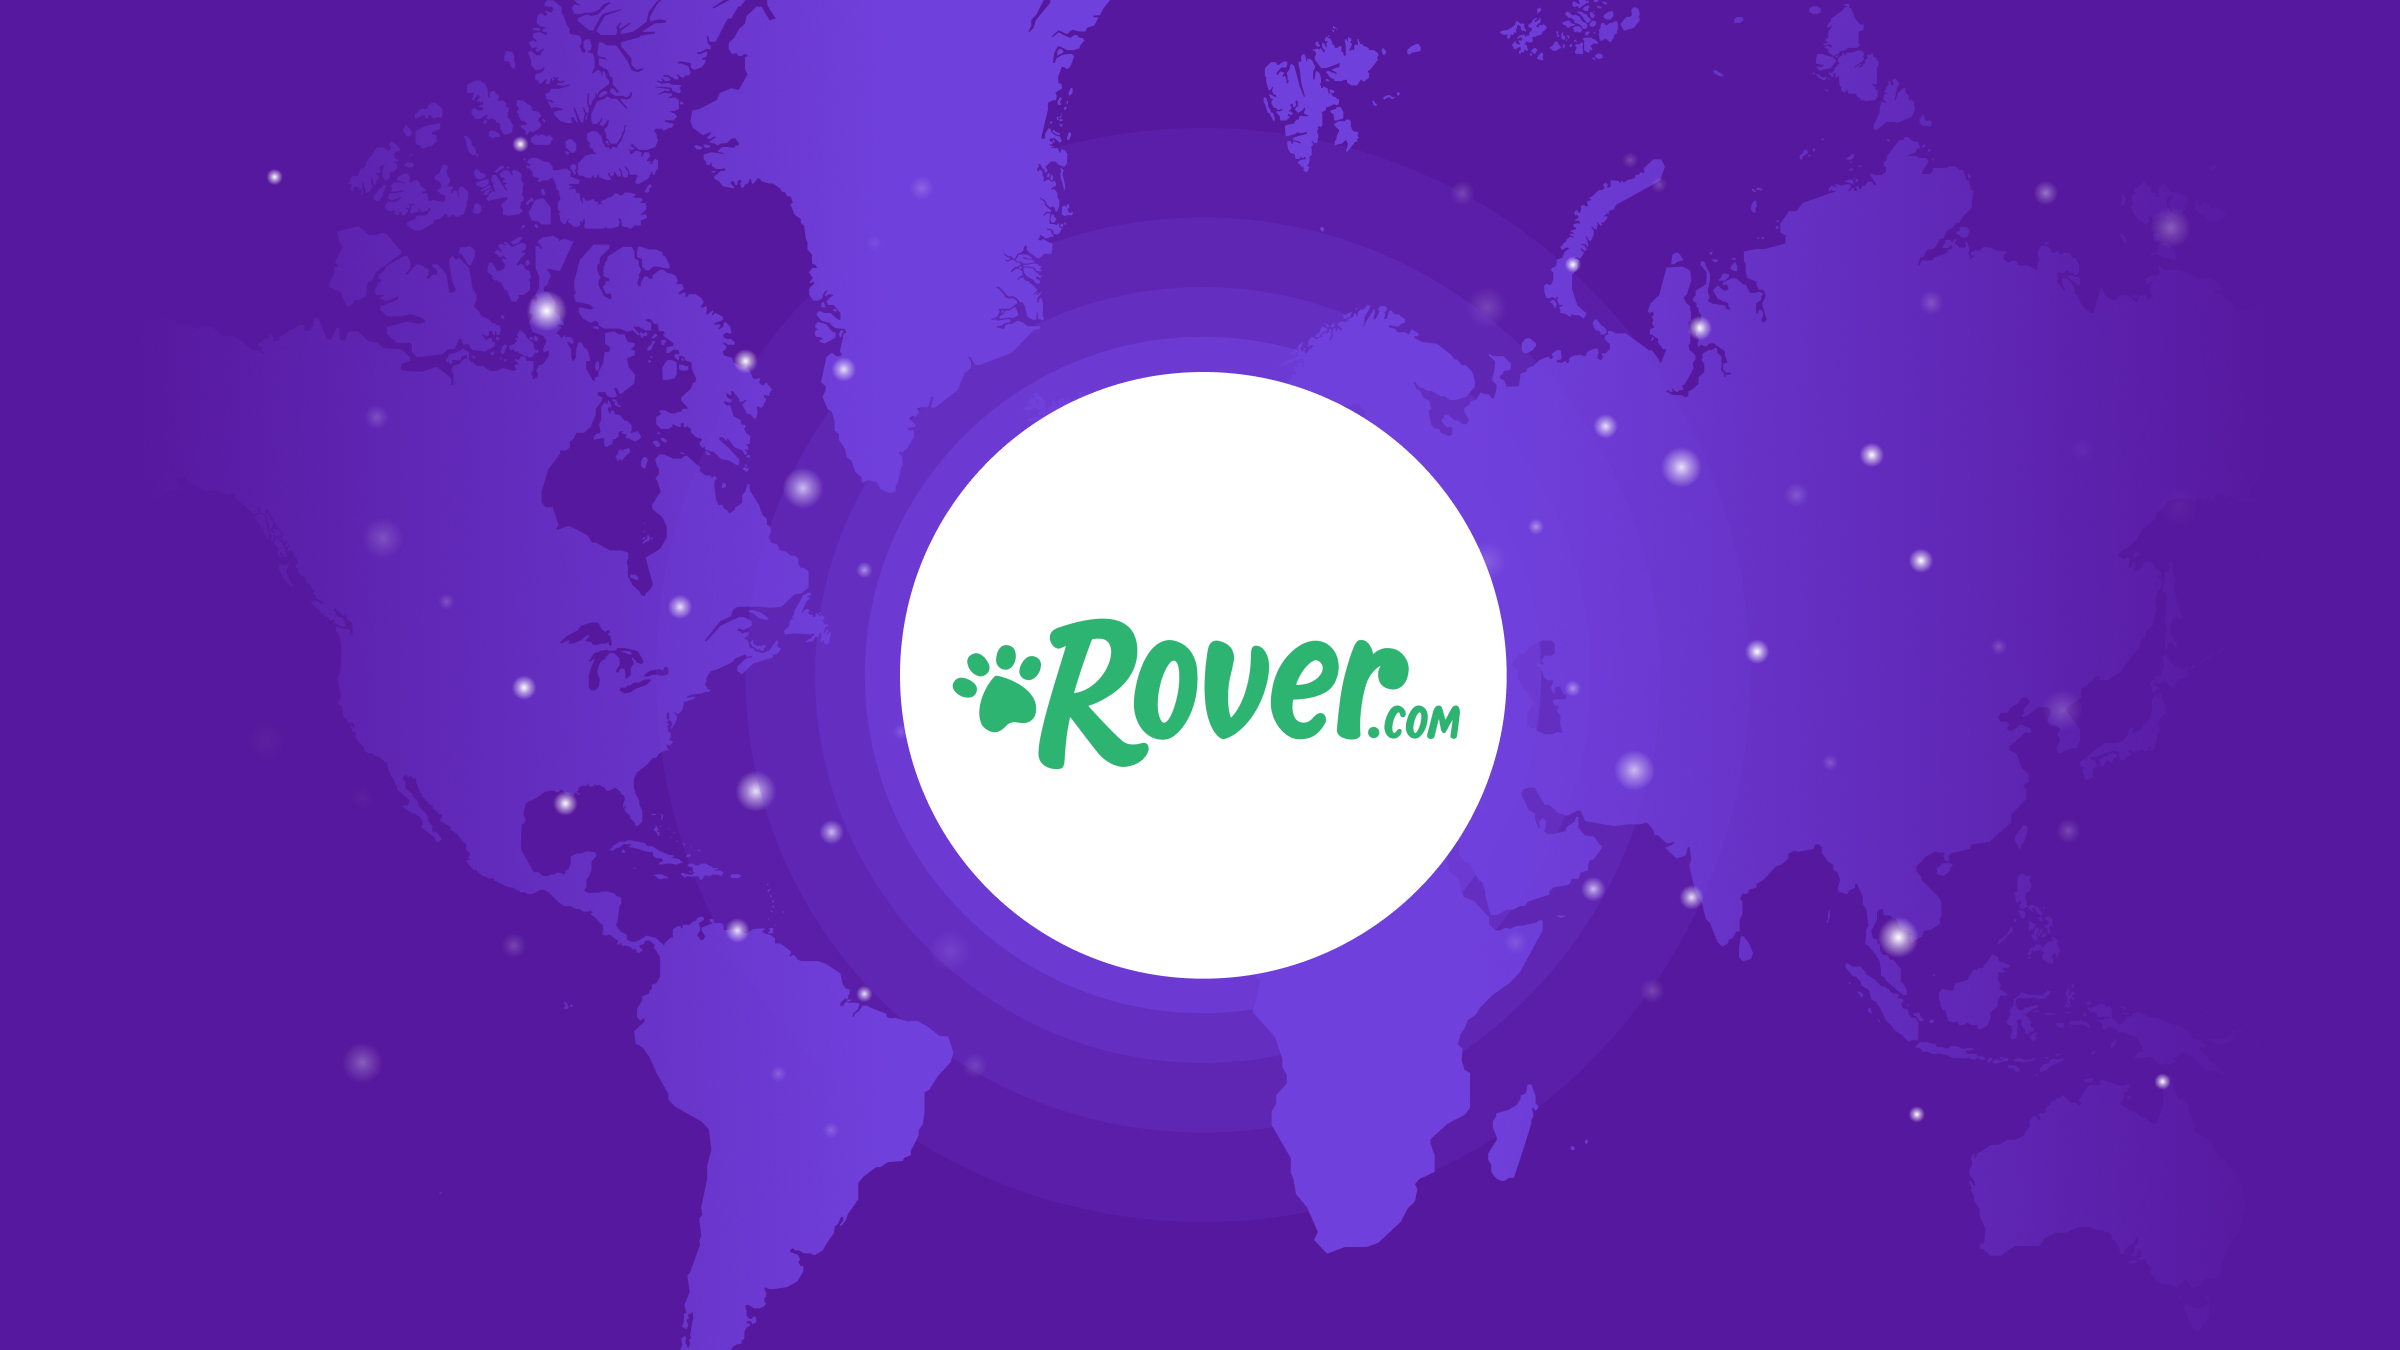 How to localize content while staying on brand with Rover